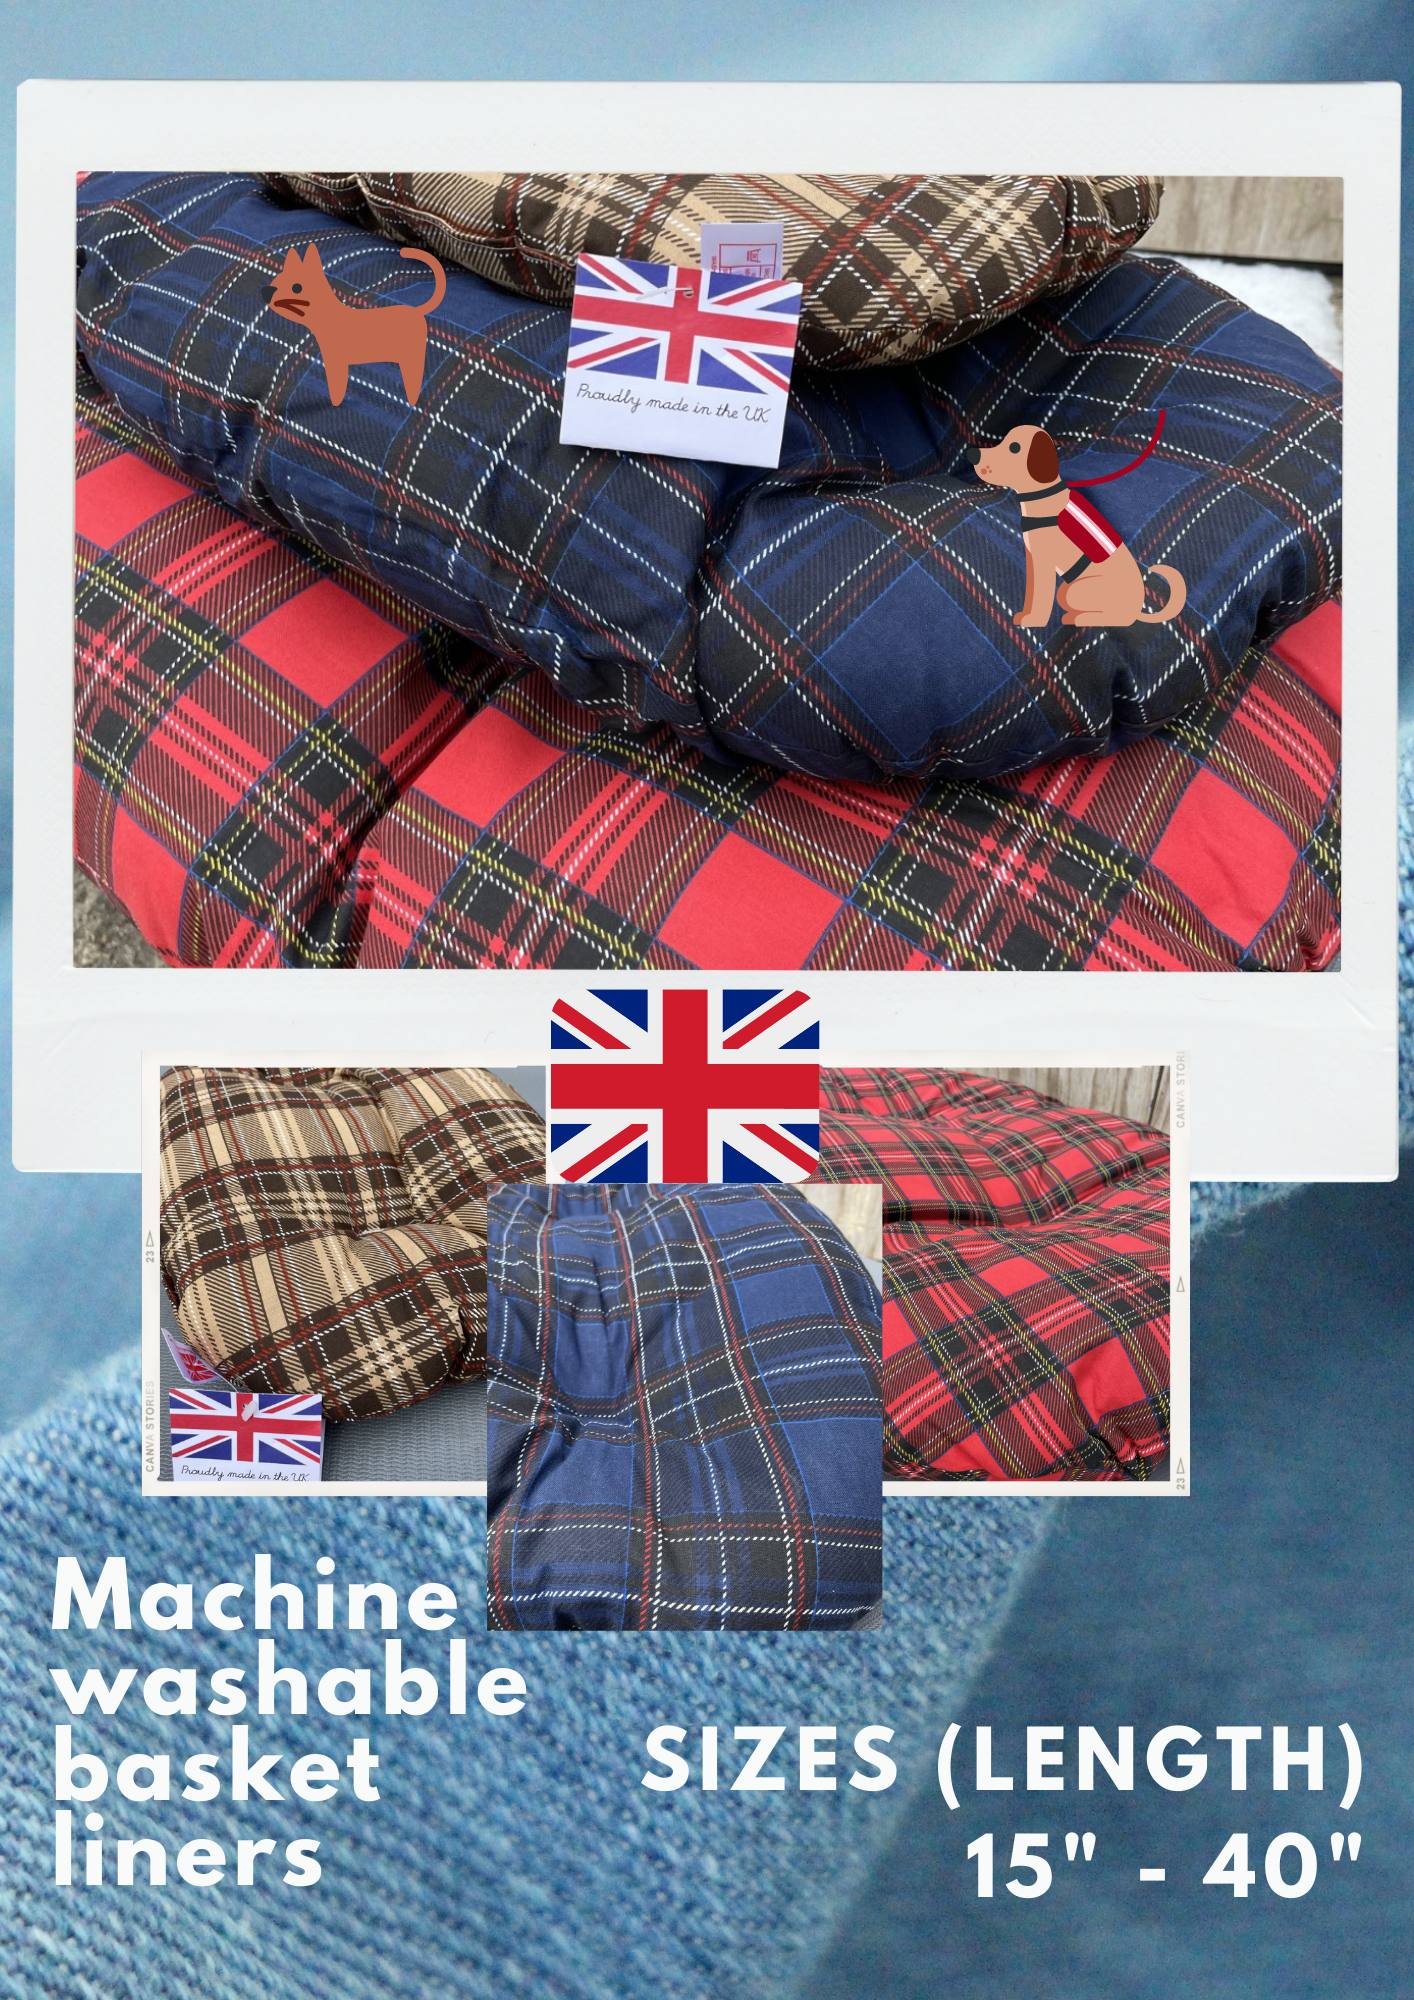 Filled basket liners - cost effective, machine washable & proudly made in the UK!